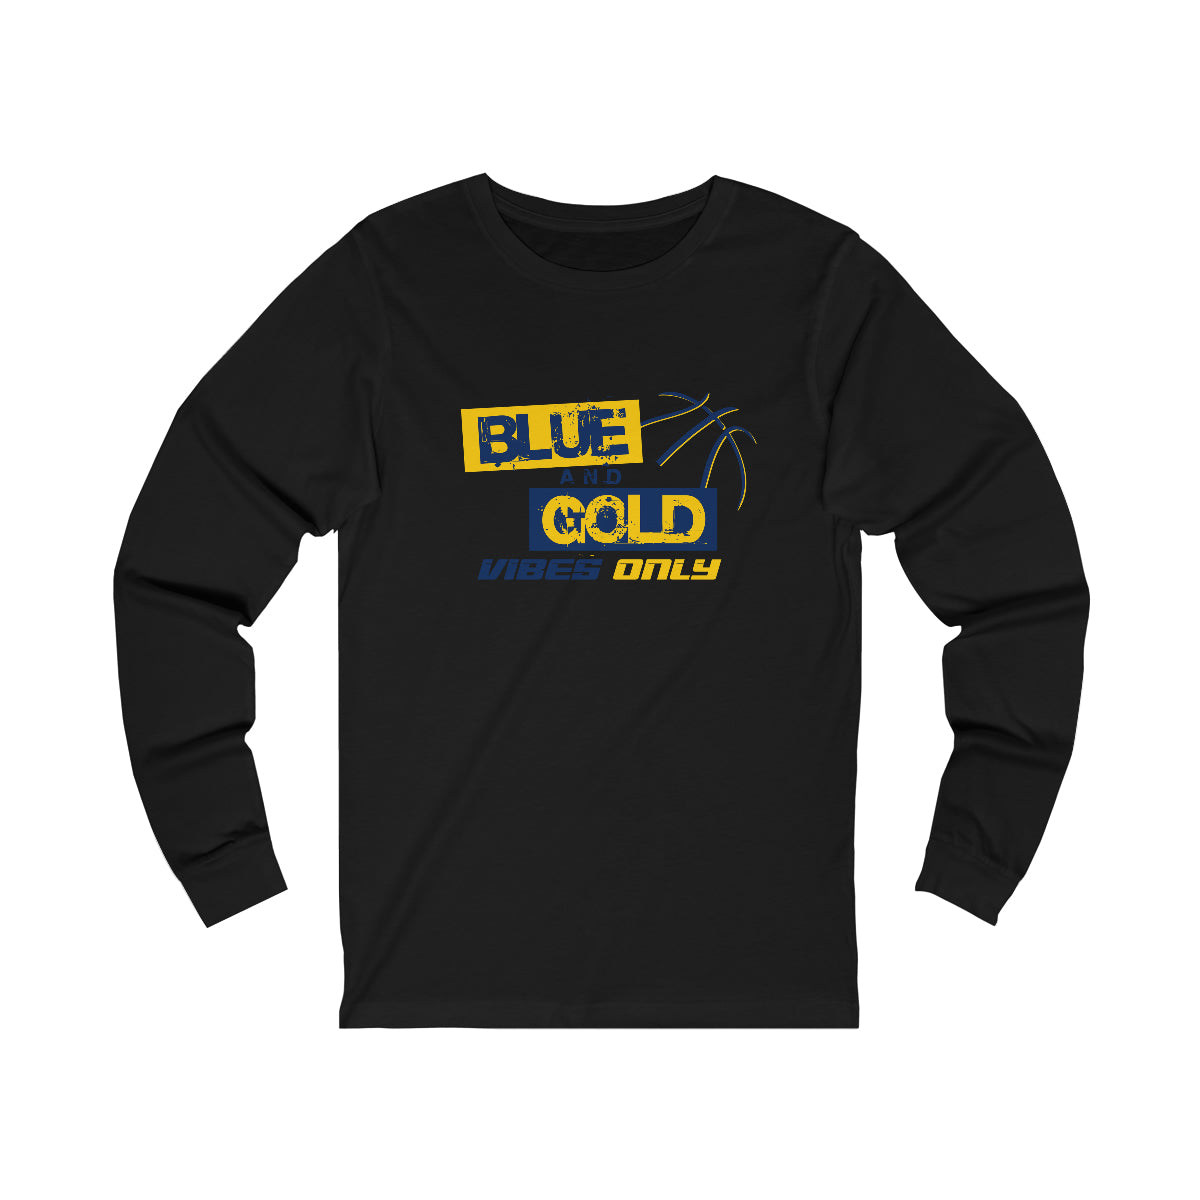 Blue & Gold Vibes Only Long Sleeve Tee